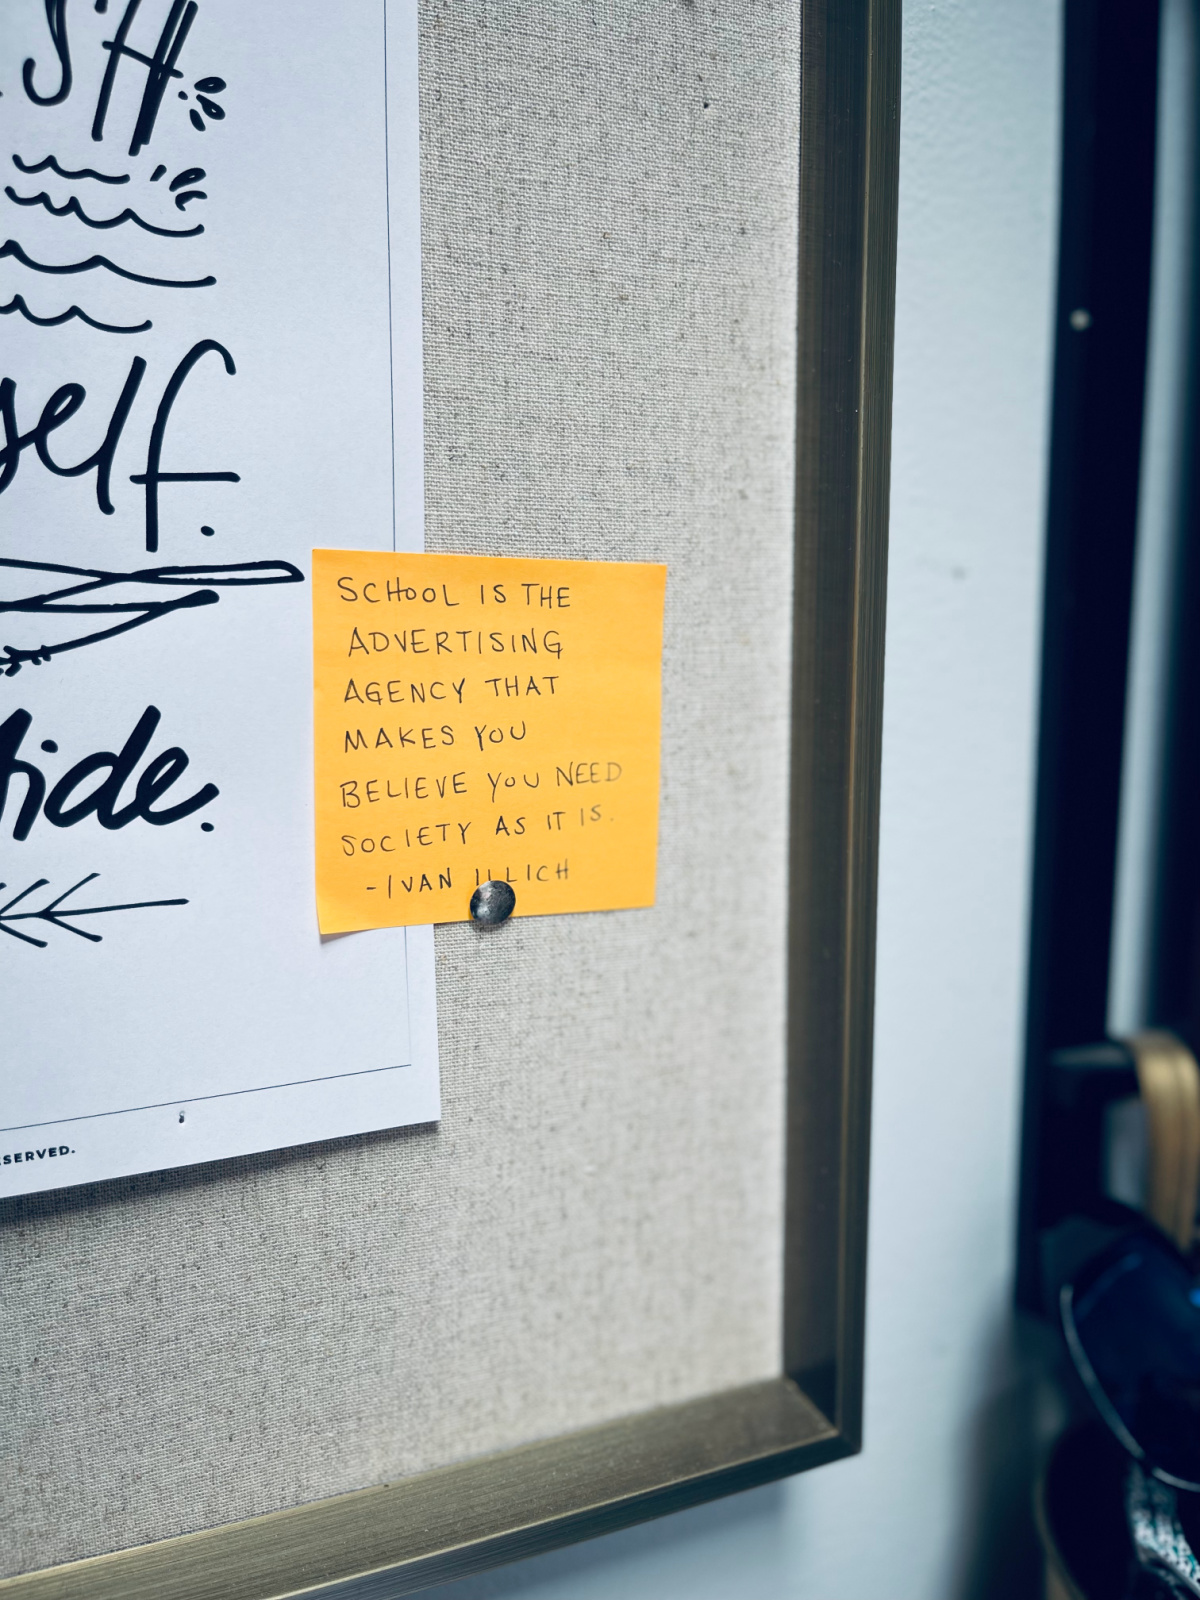 Ivan Illich quote on a post-it on bulletin board, "School is the advertising agency that makes you believe you need society as it is."